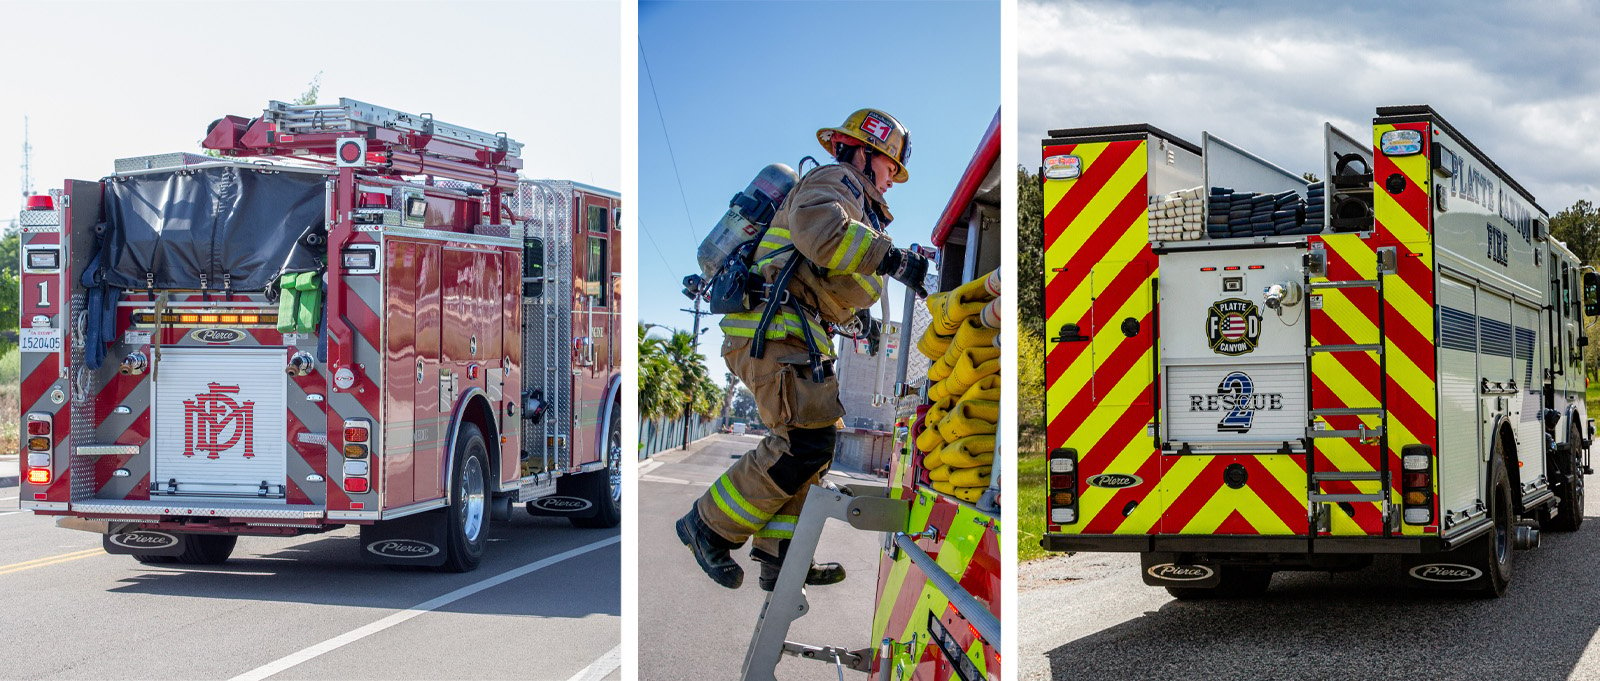 A three-frame photo shows various ladder options that allow firefighters to access the top of a fire truck.